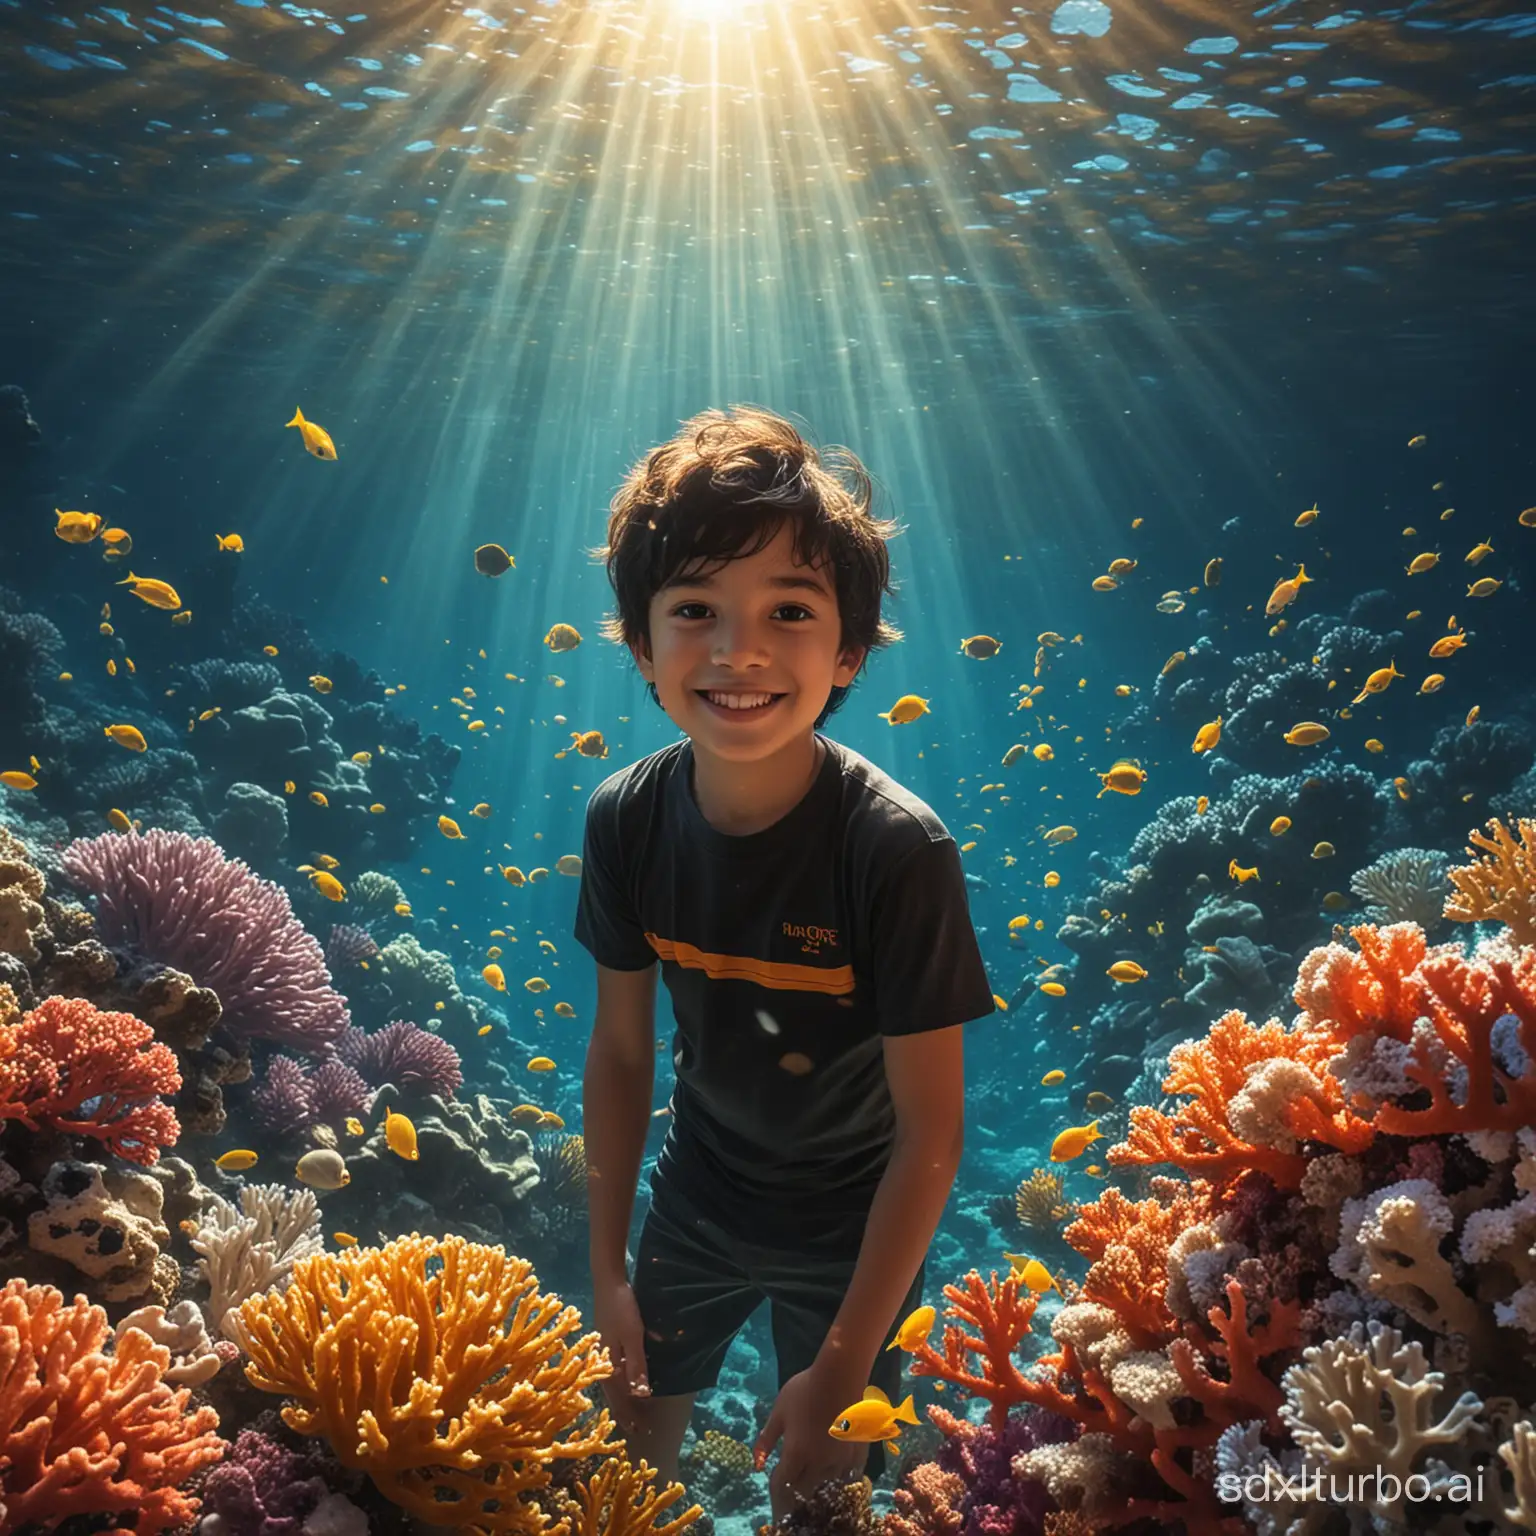 In the deep sea, a beam of golden sunlight scattered into the ocean. A handsome black haired boy and another equally handsome boy stood side by side with a smile, colorful corals, and a group of small fish